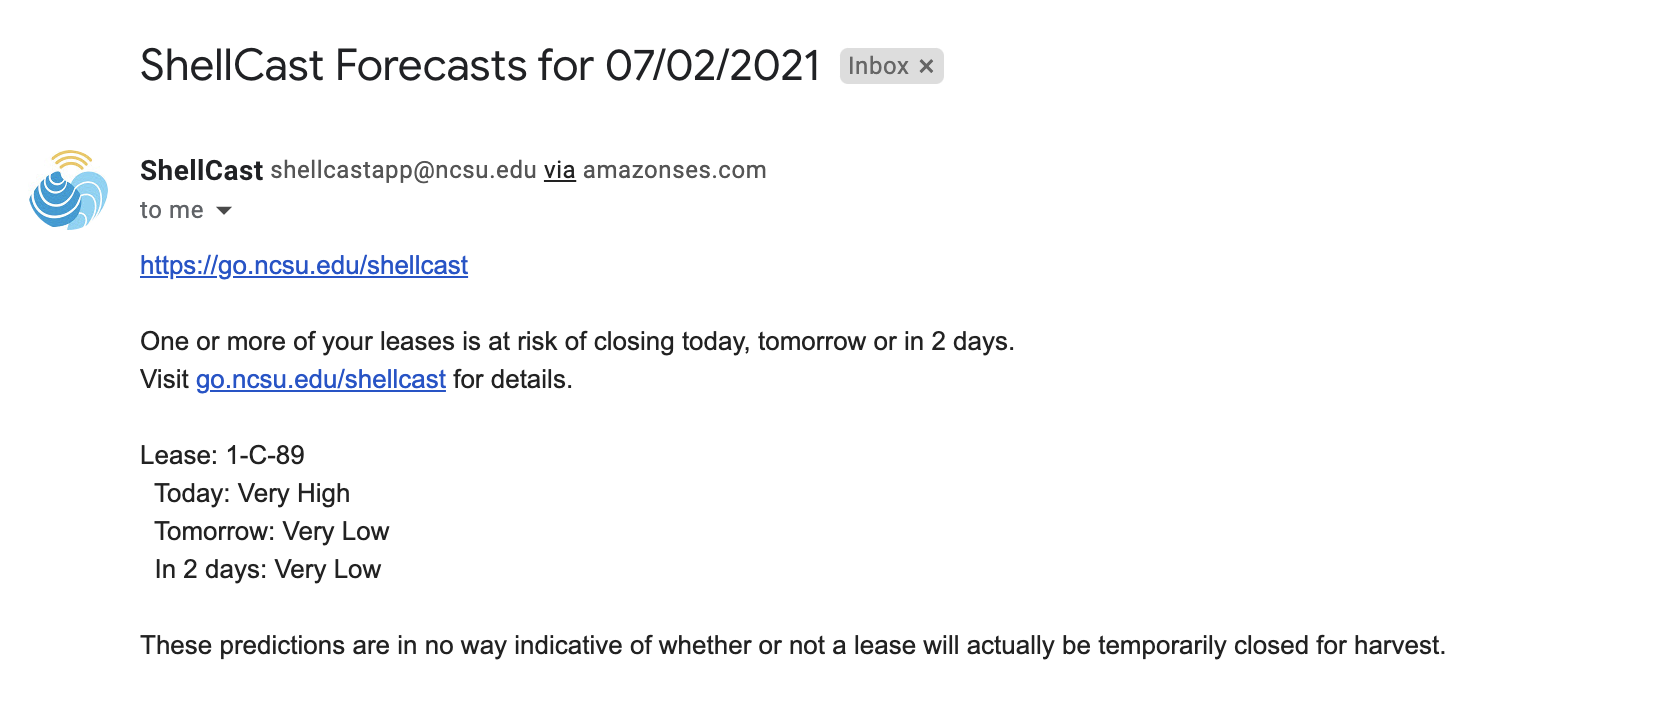 Screenshot of email notification showing forecasted risk of closure details 
      for each lease and a link to return to the ShellCast web application to see more information.